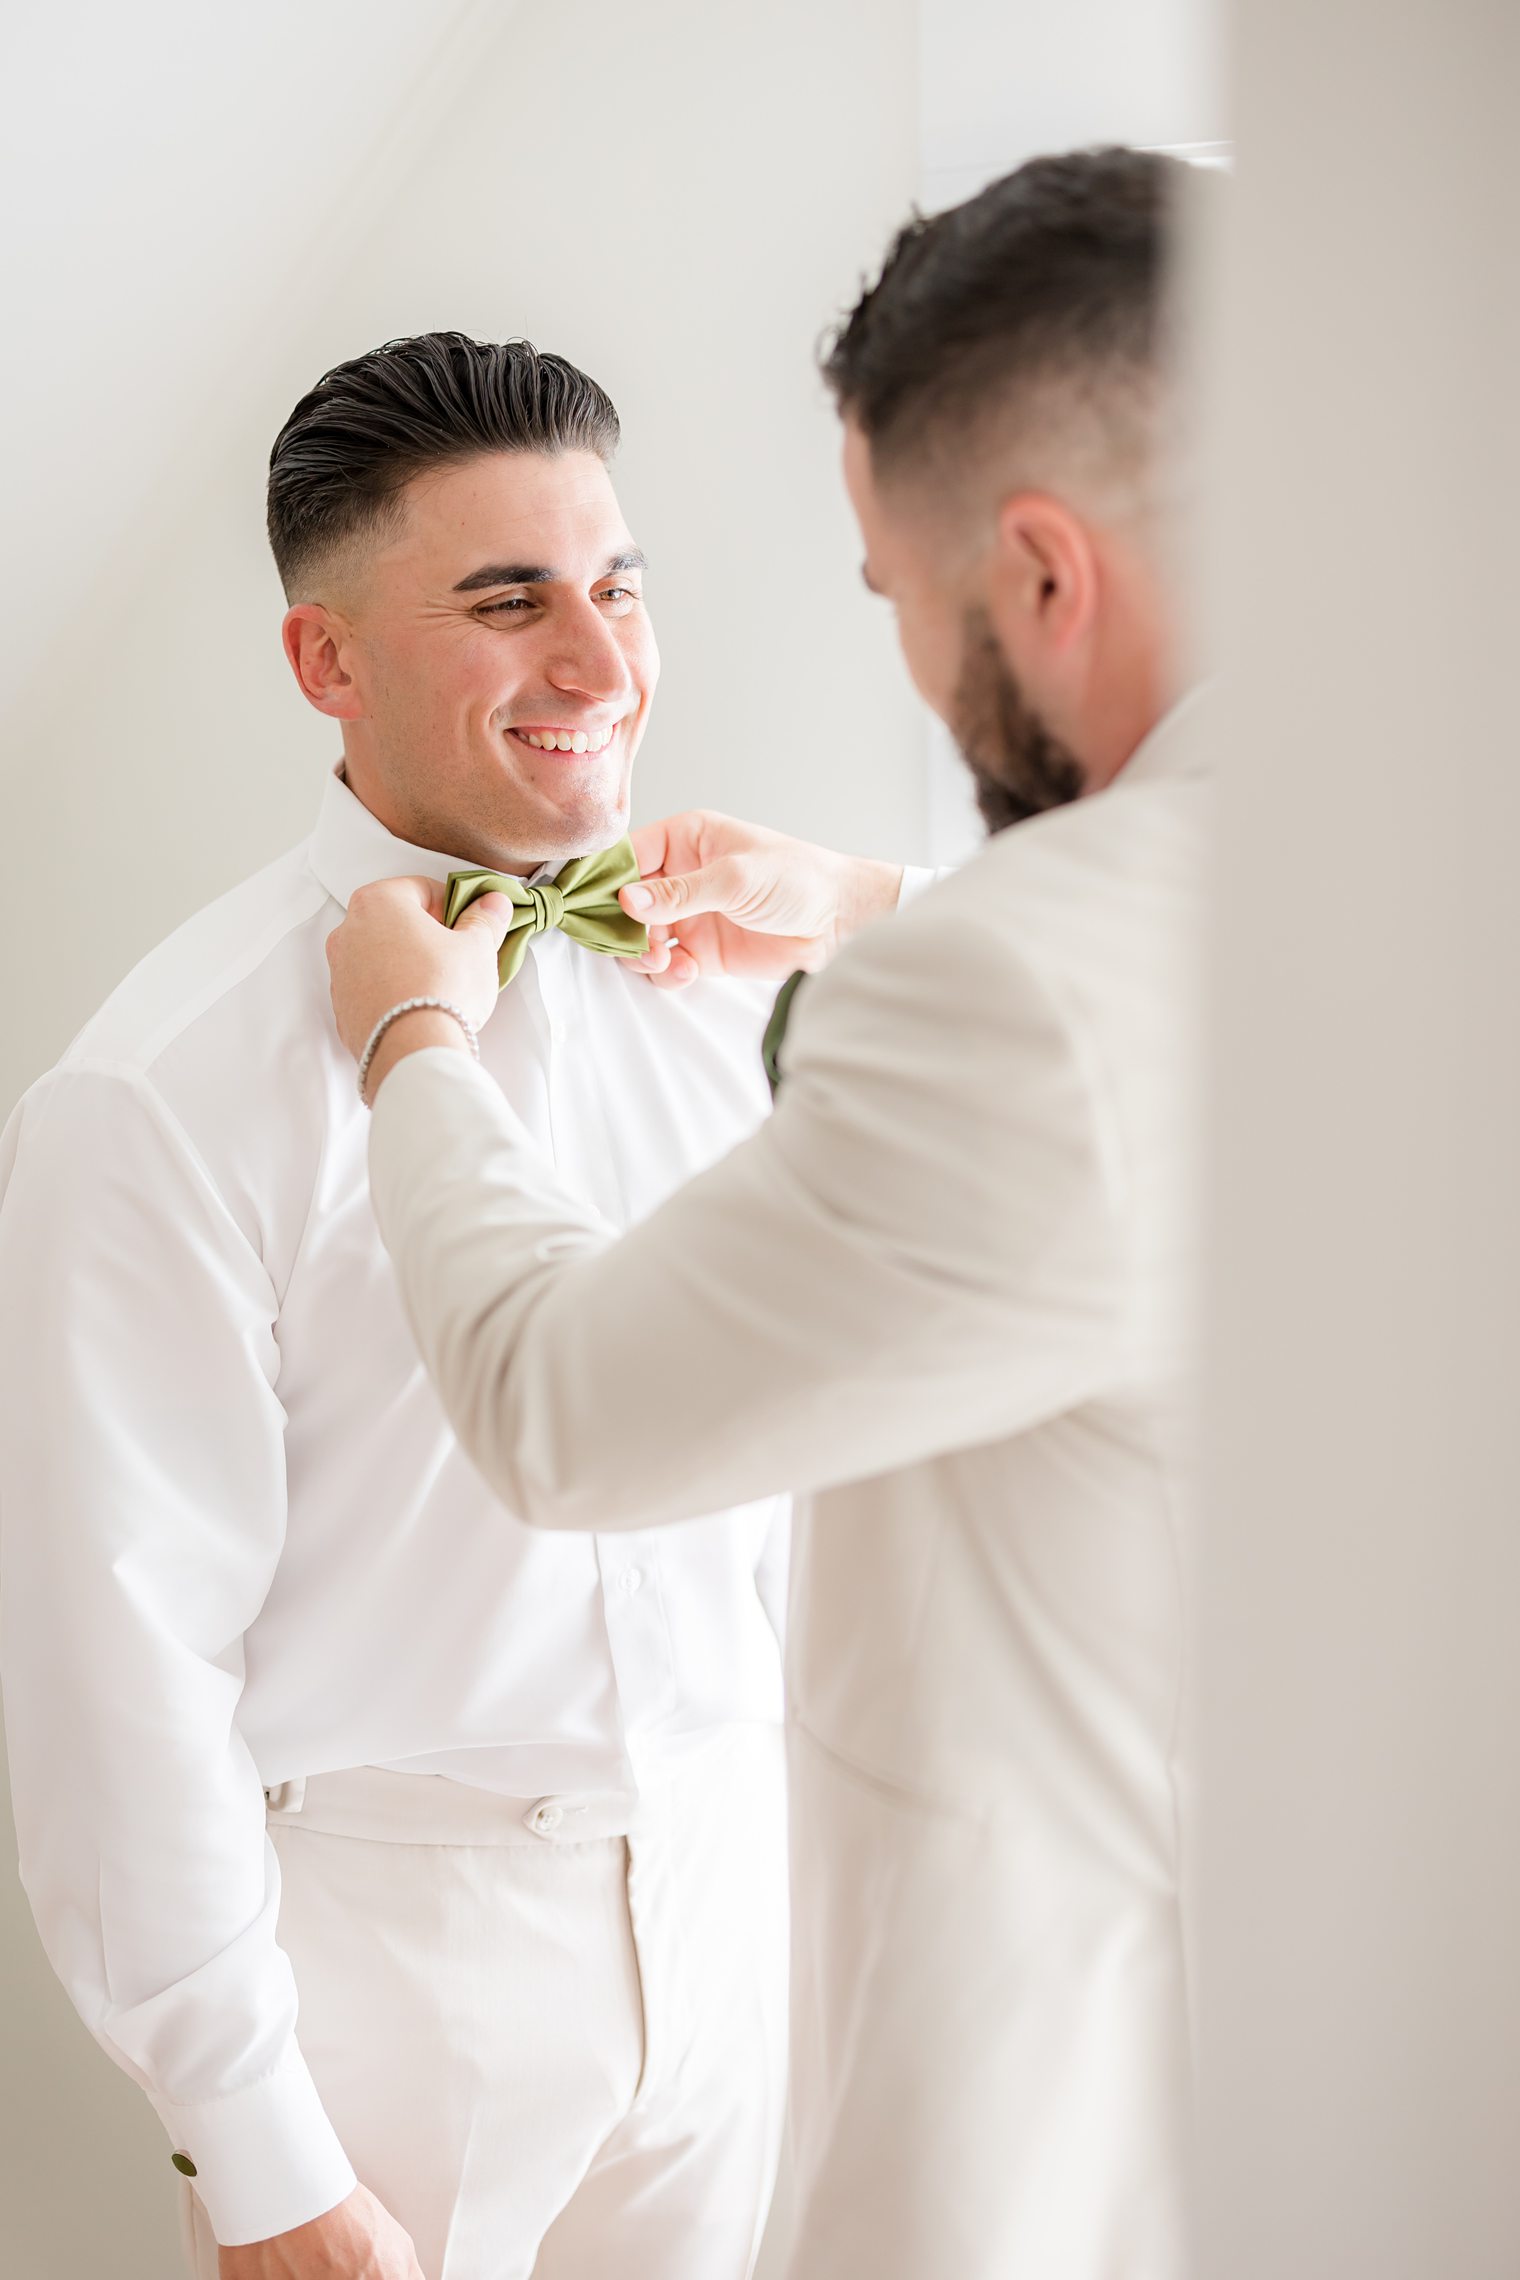 Groom getting ready with one of the best man